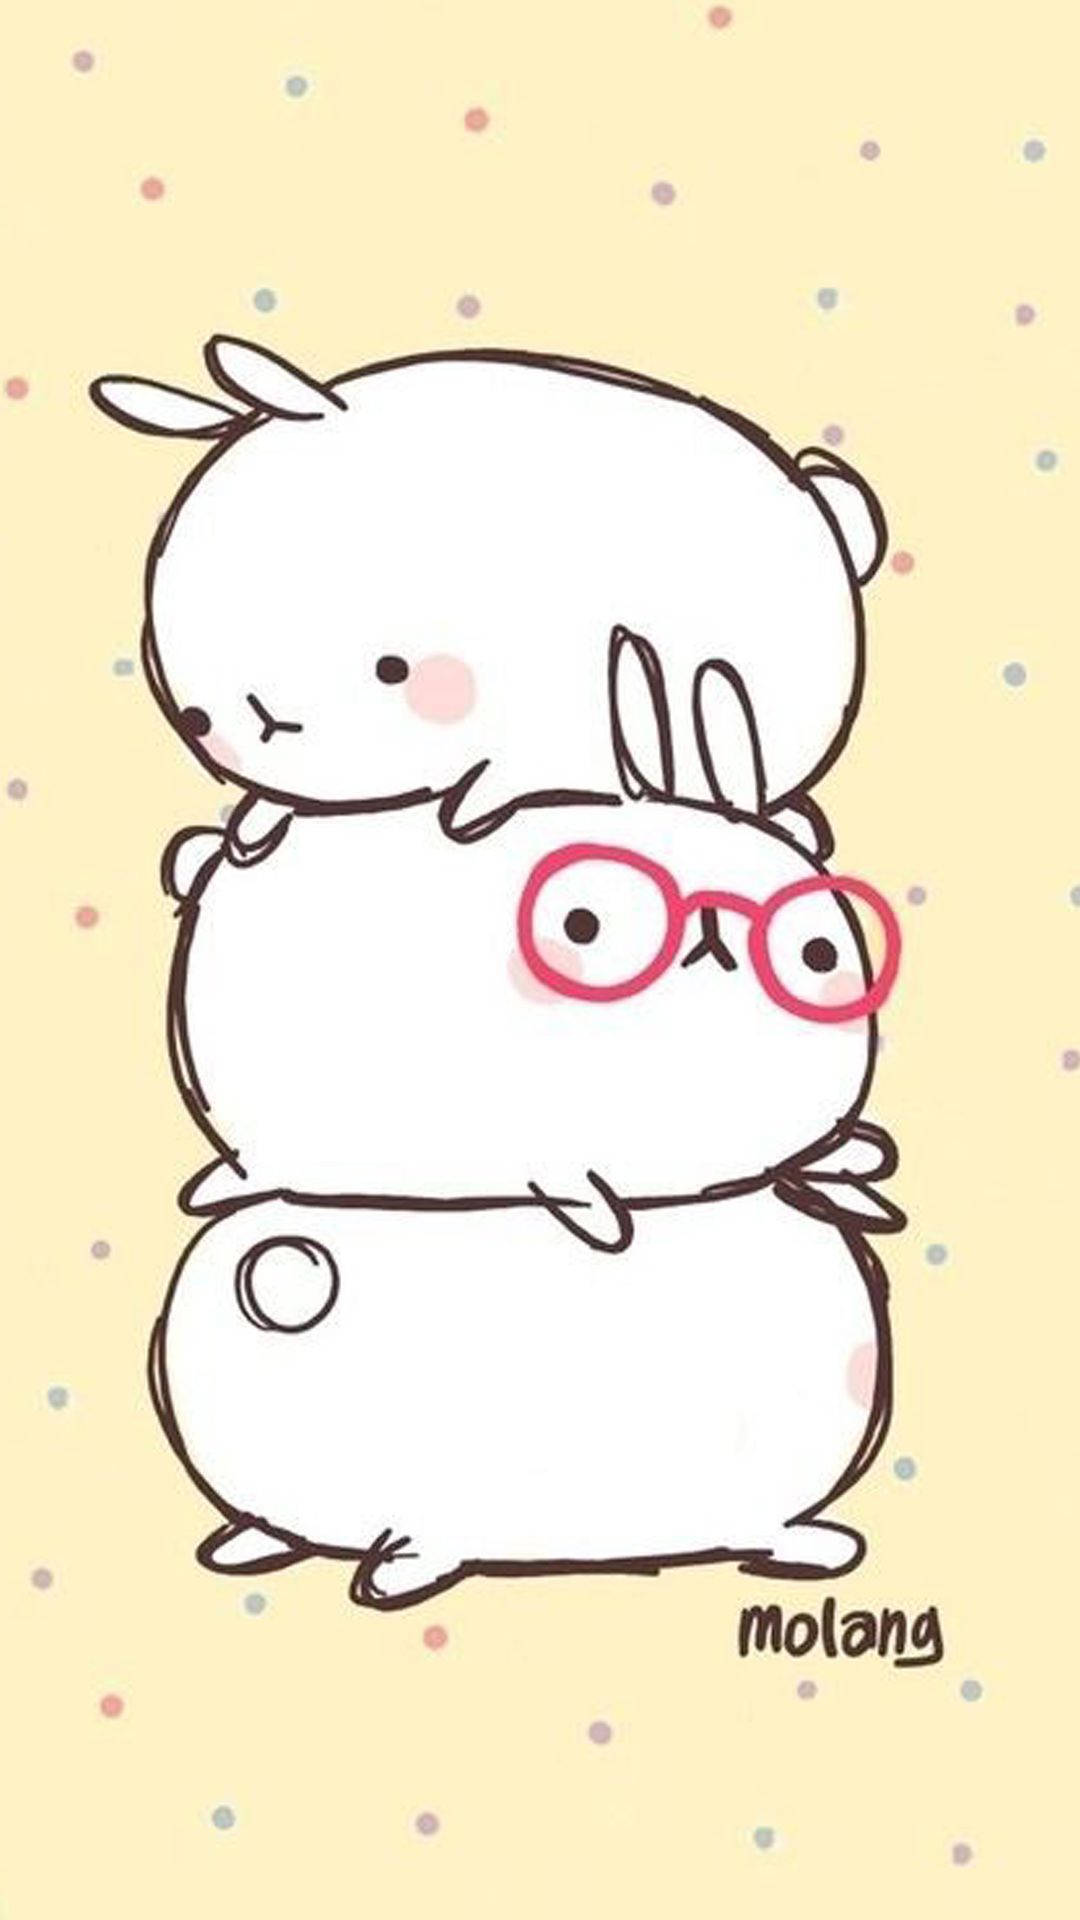 White bunnies stack atop each other in a cute Molang art wallpaper.